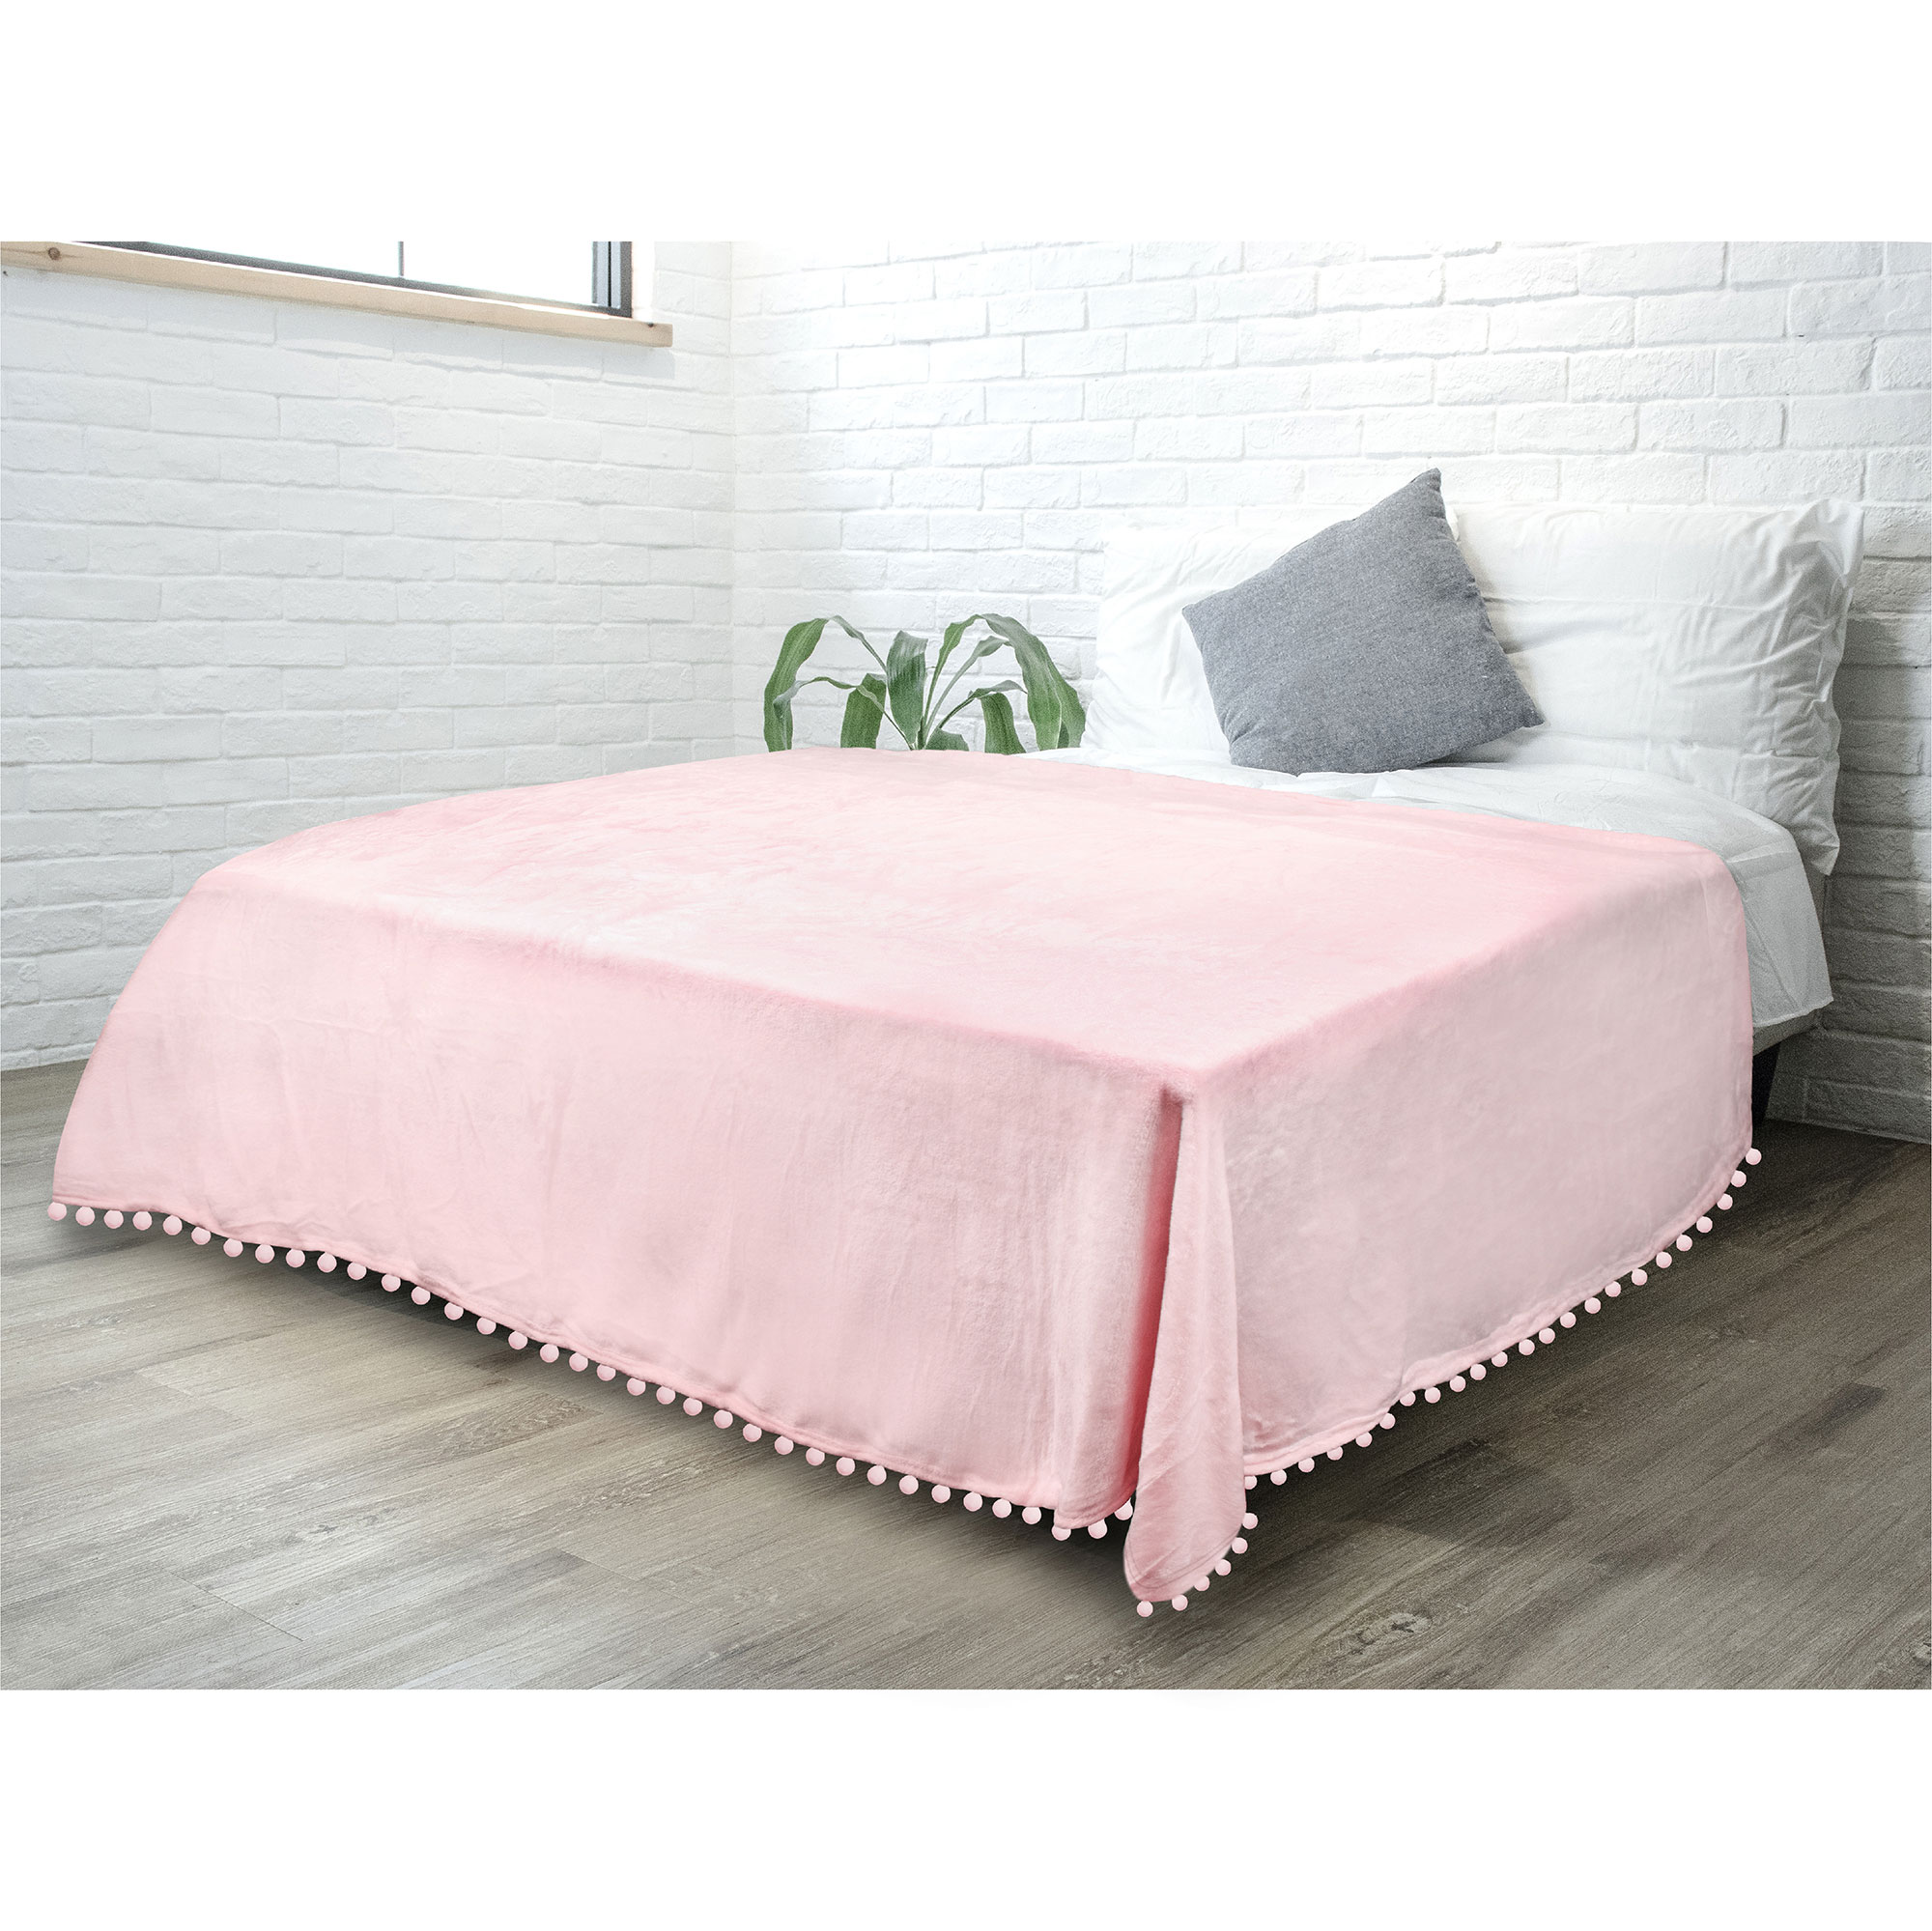 thumbnail 71 - Fleece Throw Blanket with Pom Pom Fringe Super Soft Lightweight Bed Couch Home